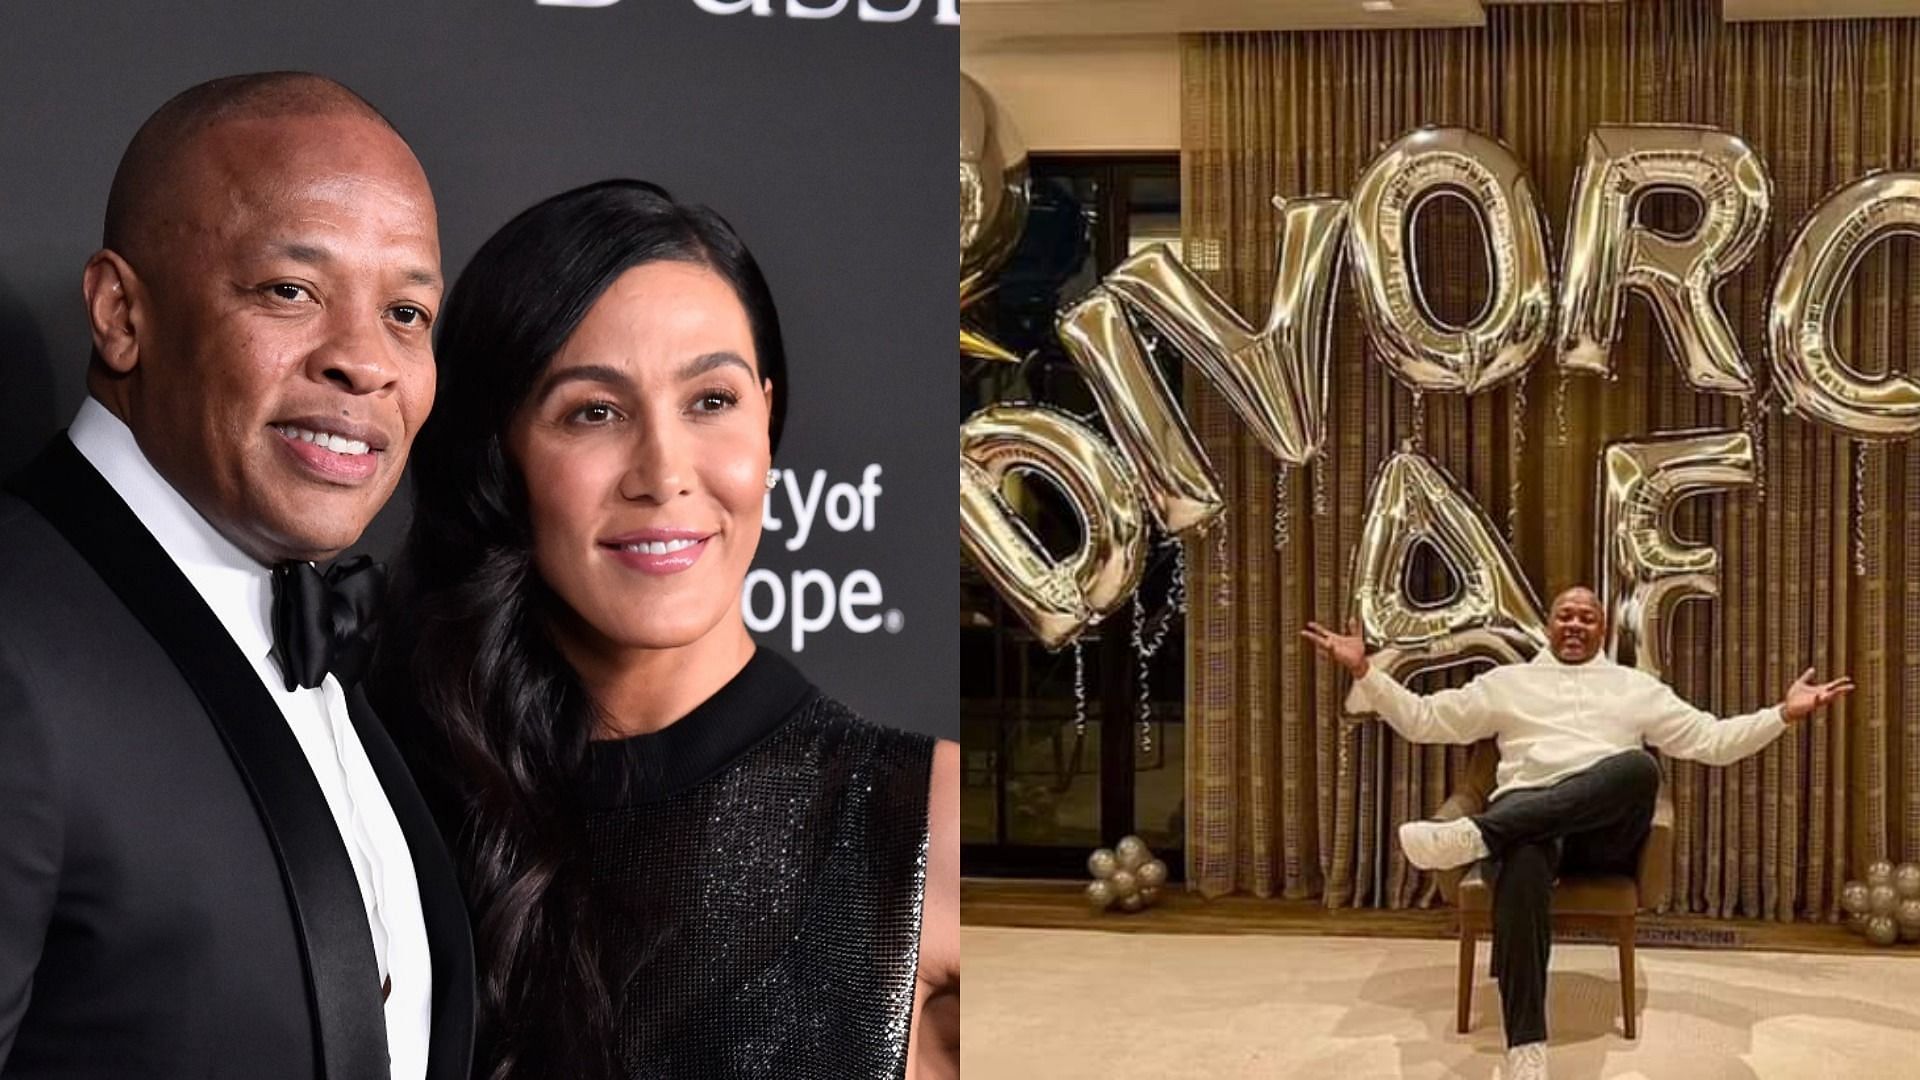 Dr. Dre and Nicole Young have divorced after 24 years of marriage (Image via Sportskeeda)